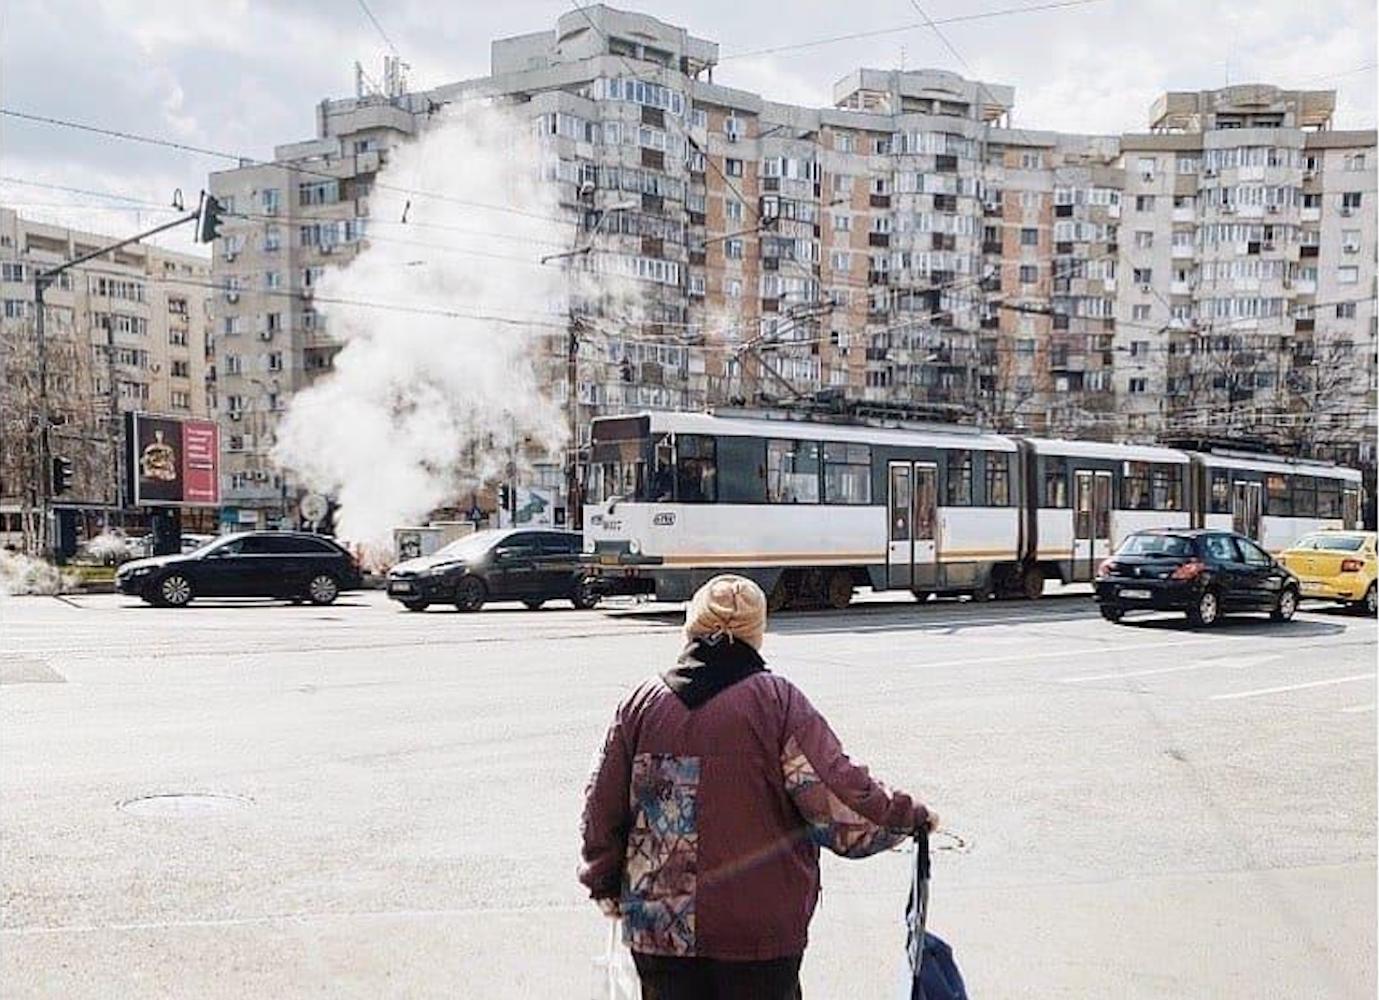 Bucharest on your doorstep: the Instagram account showing the parade of urban life in the Romanian capital